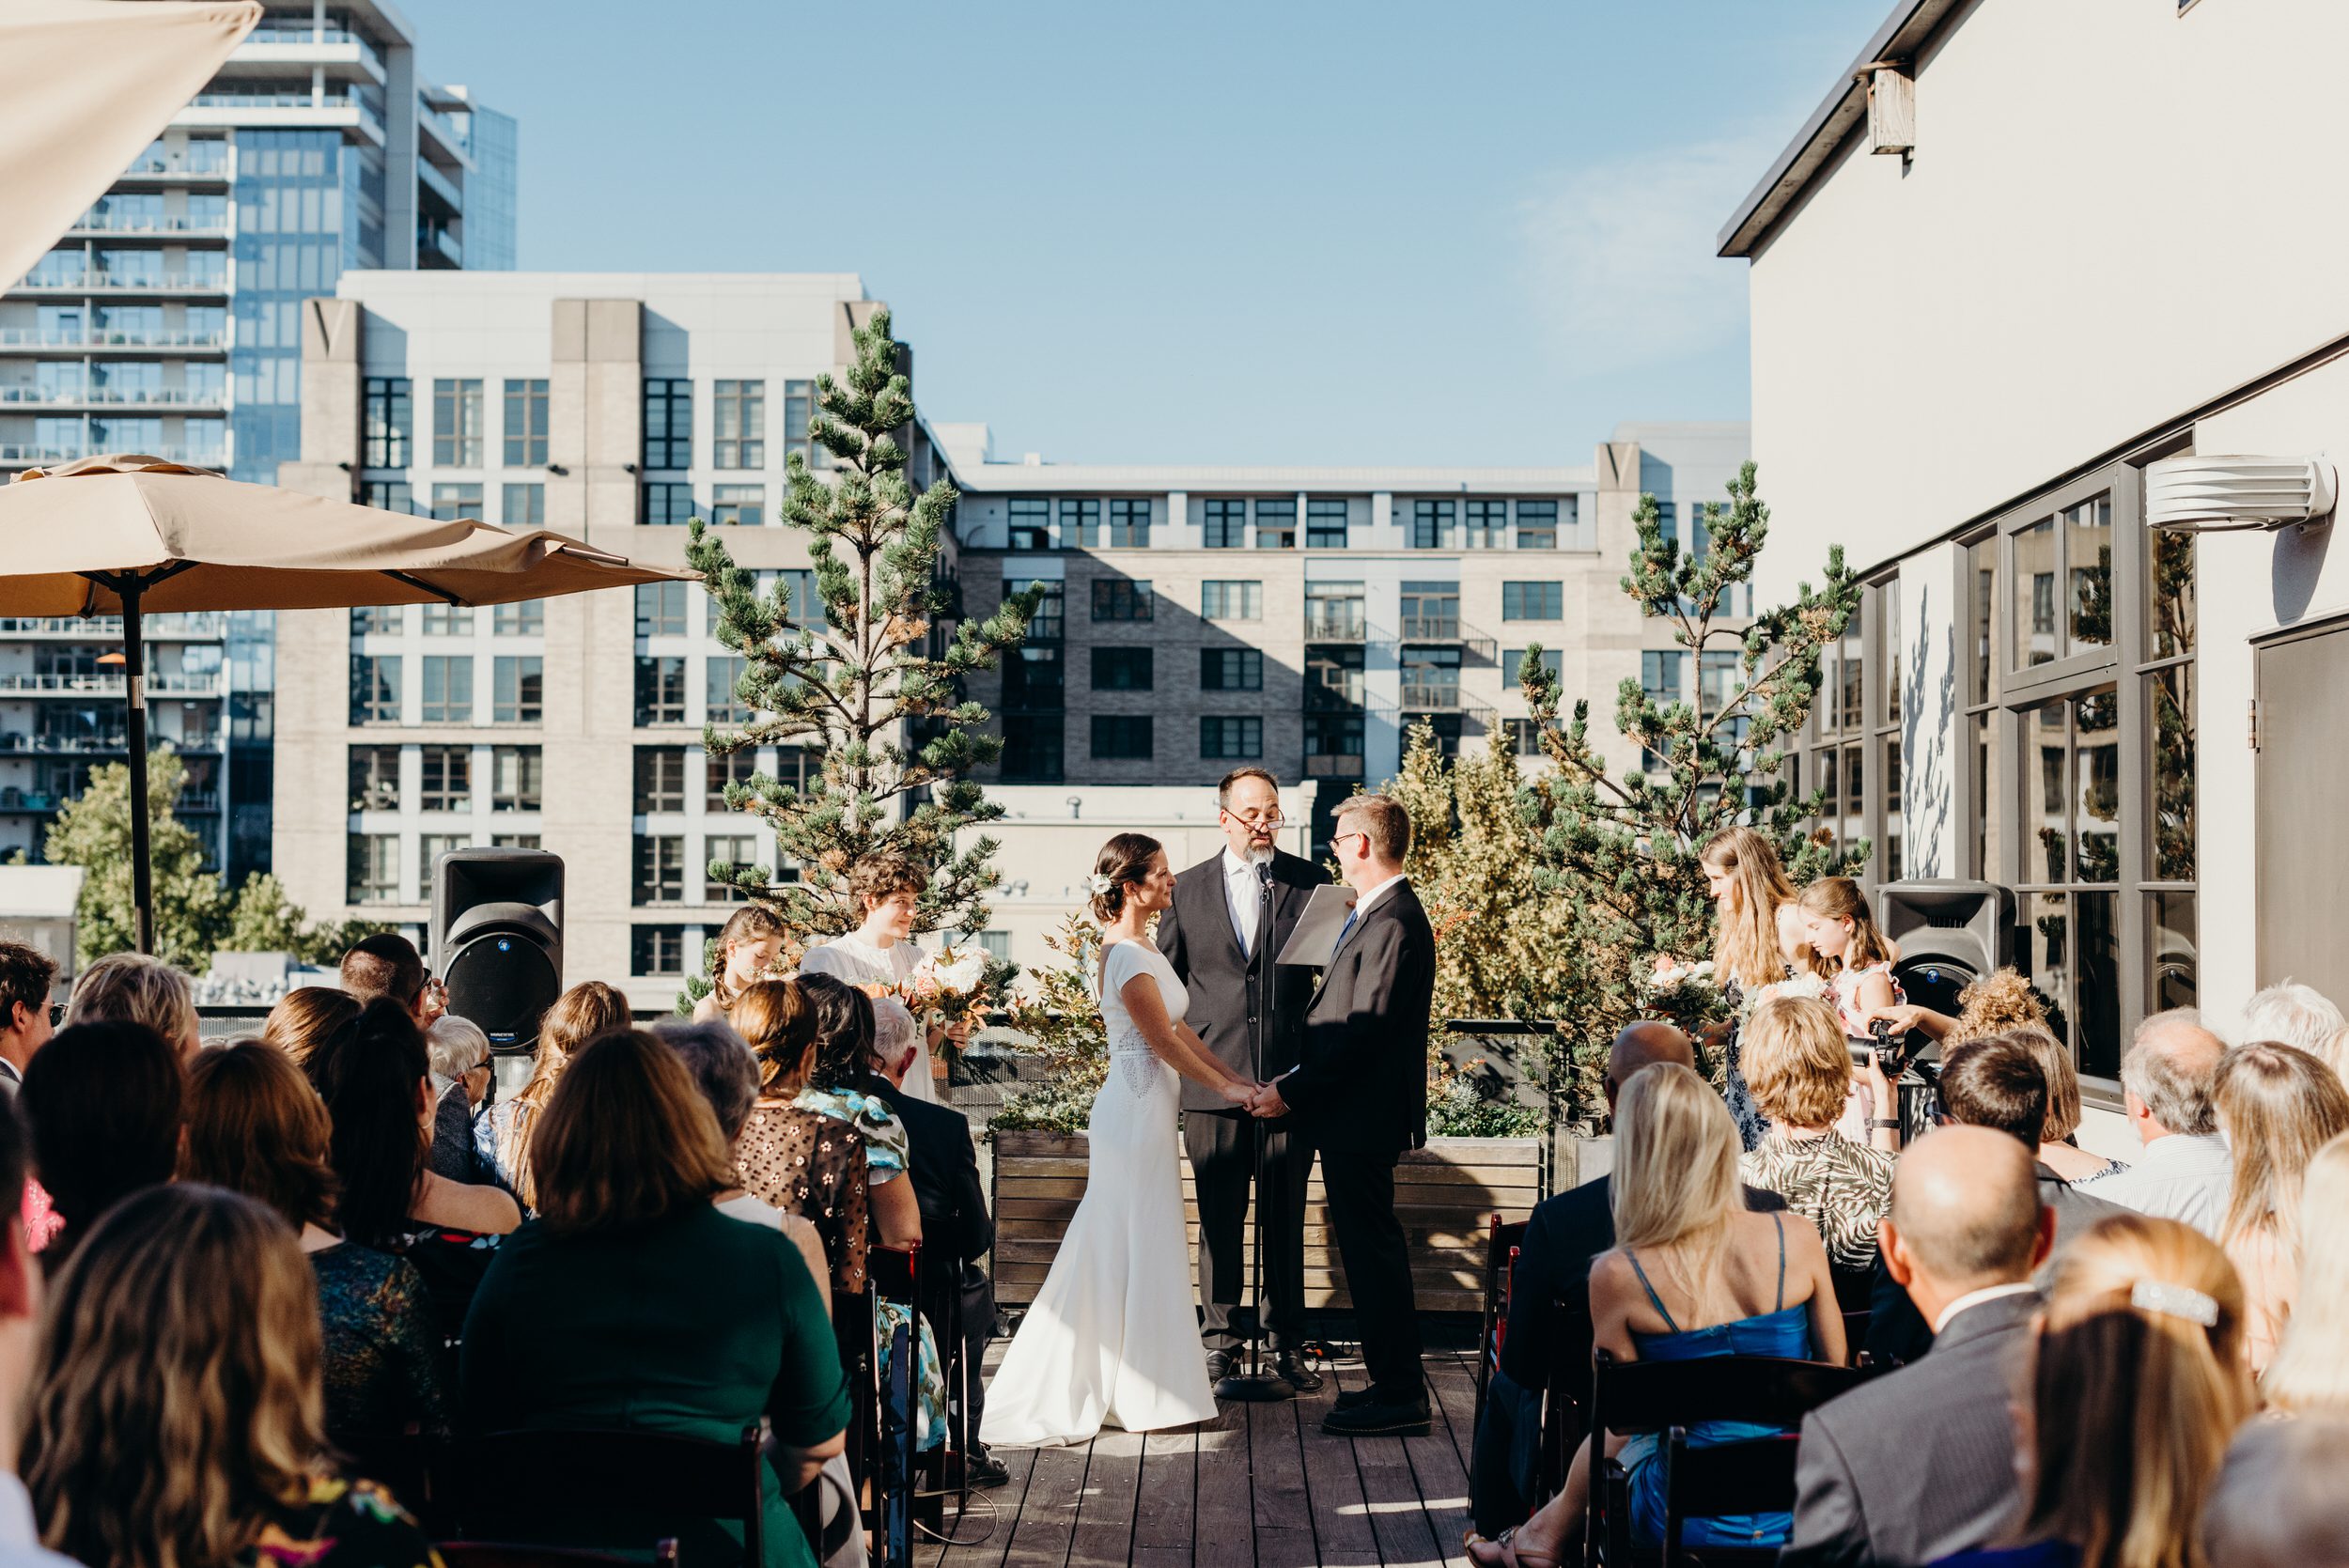 A wedding ceremony on the rooftop of the Ecotrust building in Portland, Oregon.